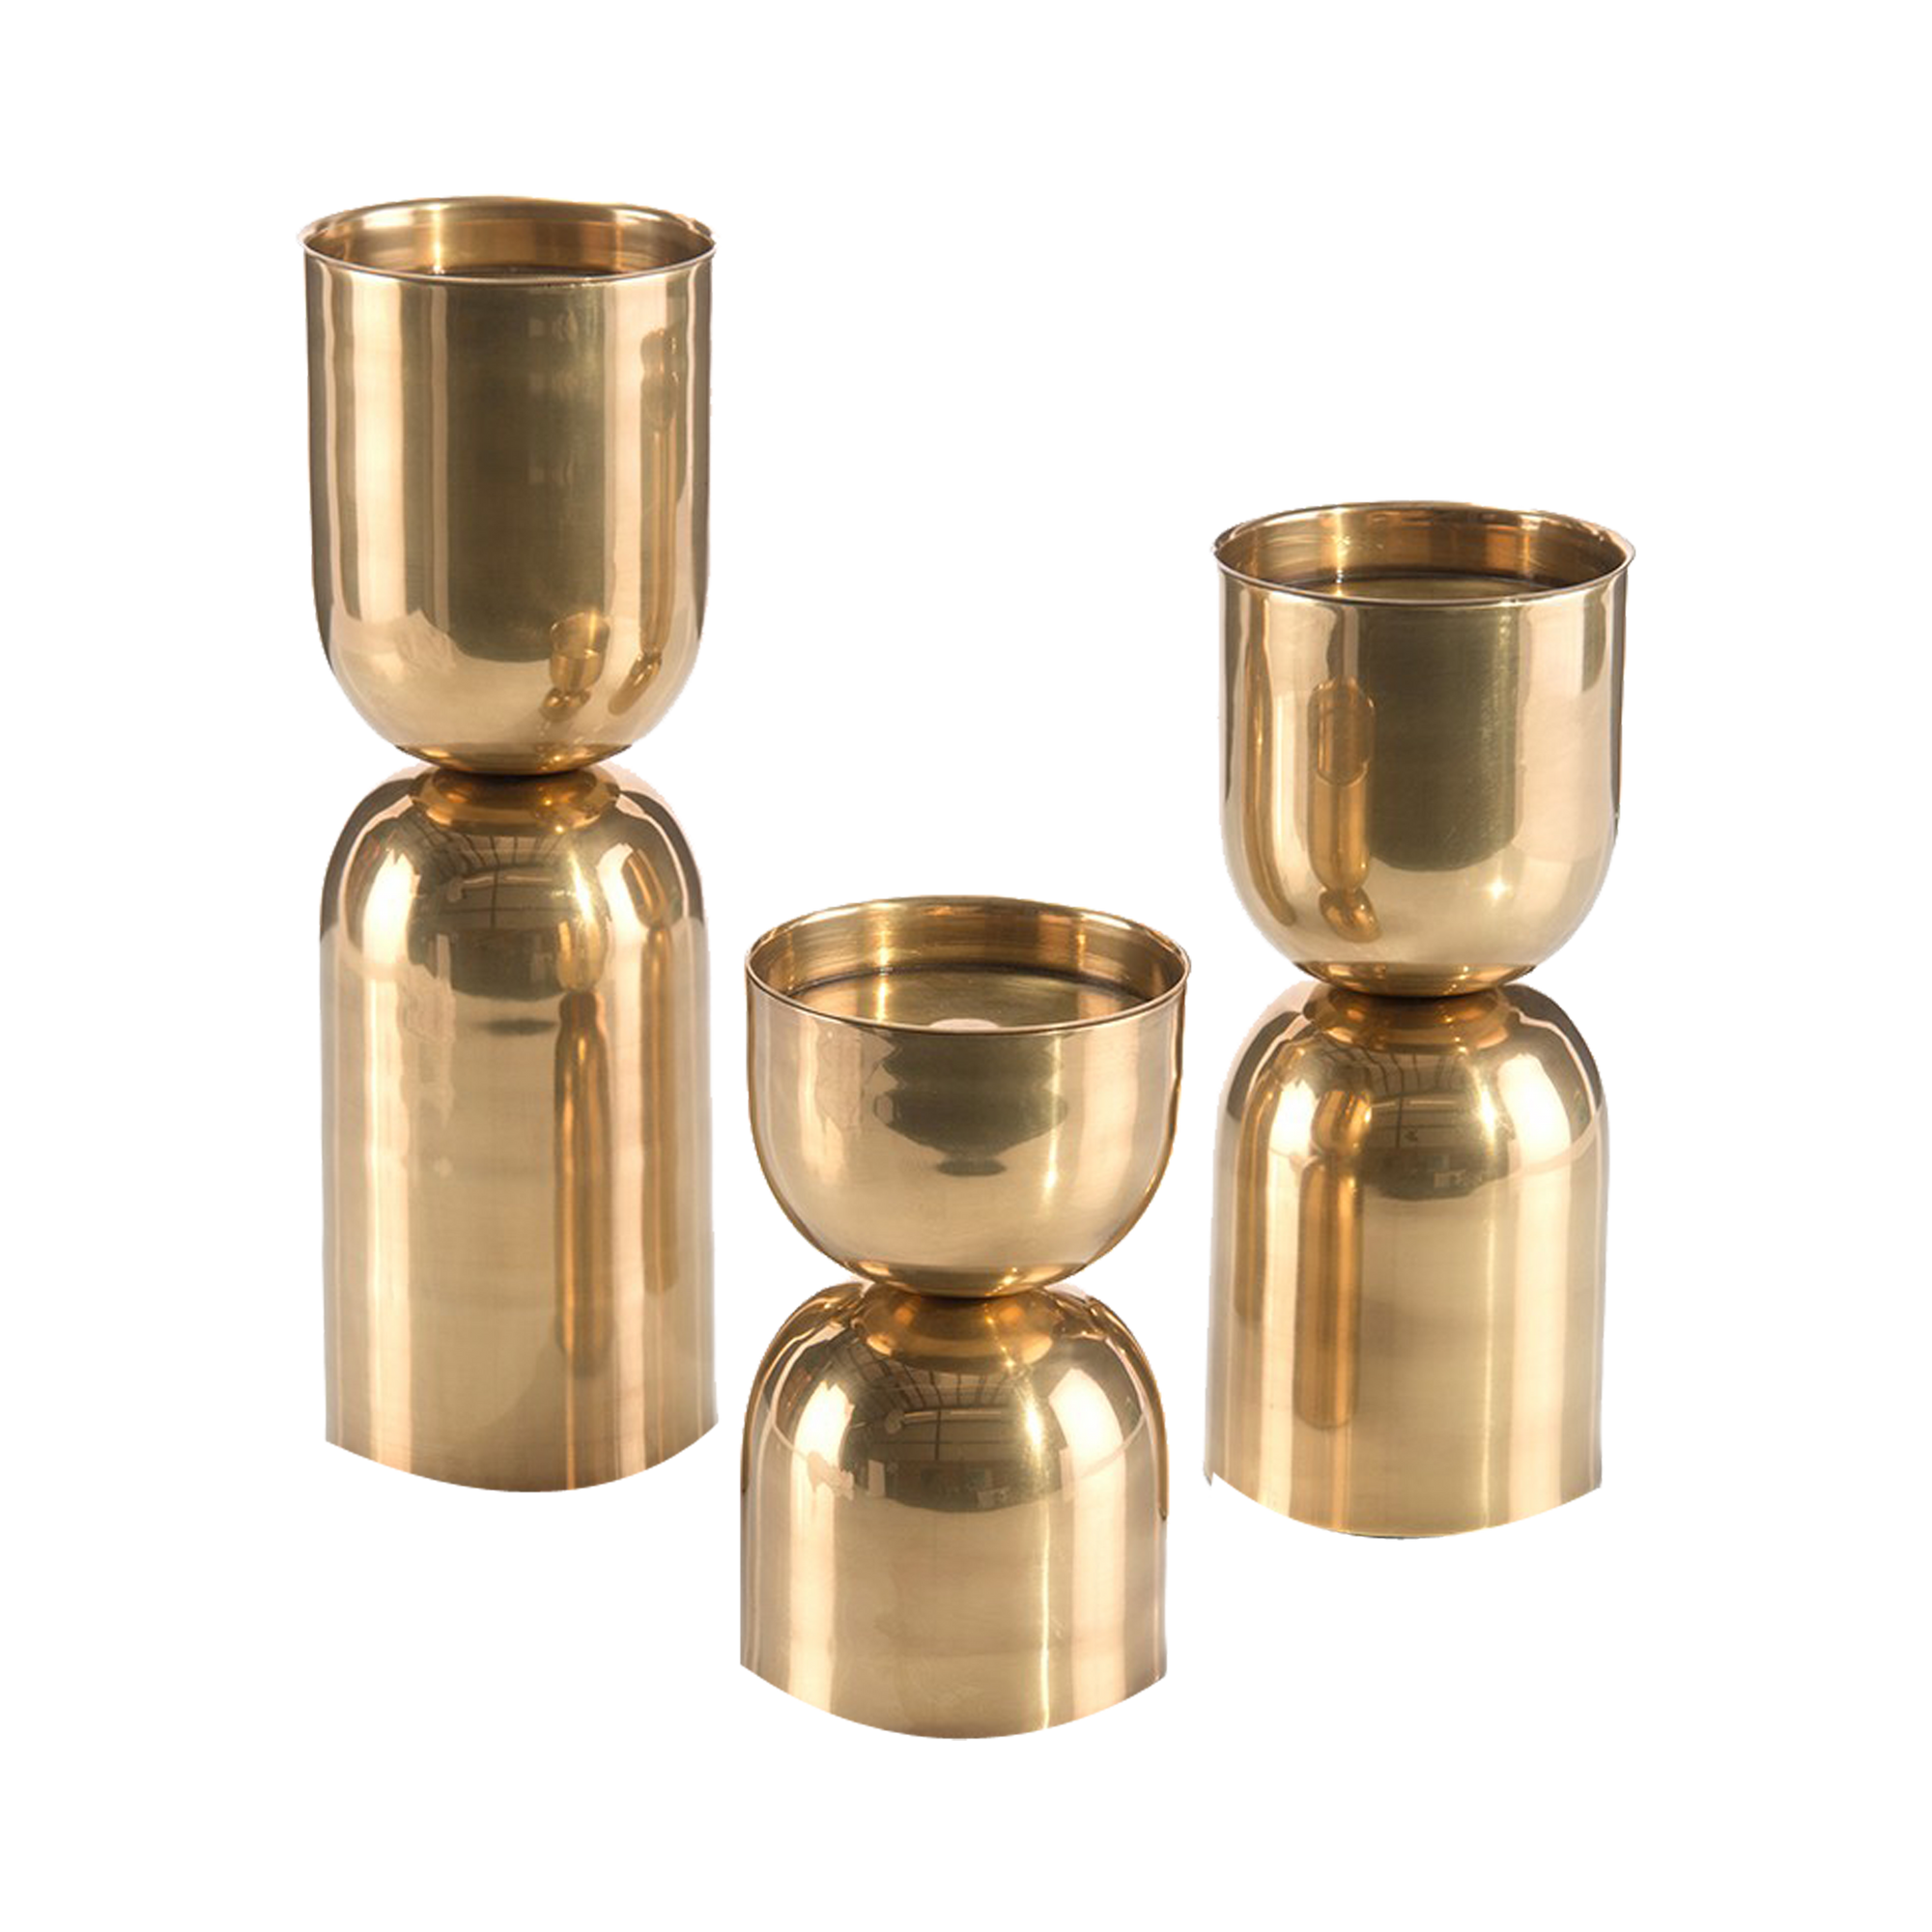 A tapered set of three hourglass candleholders in antique brass.